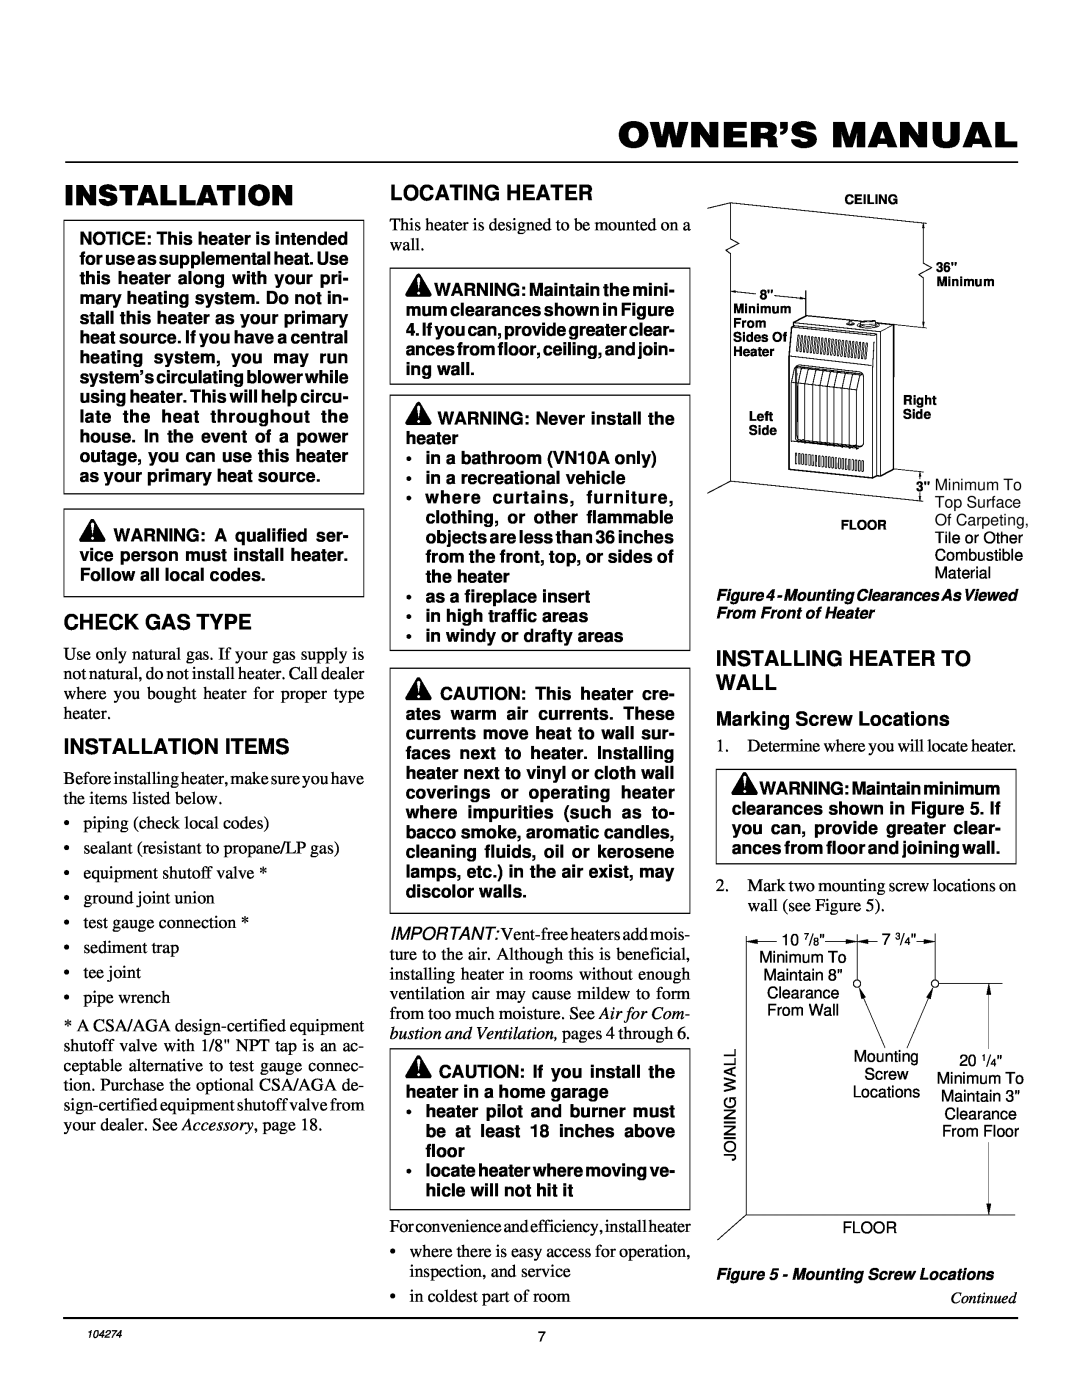 Desa VN6D Owner’S Manual, Check Gas Type, Installation Items, Locating Heater, Installing Heater To Wall 